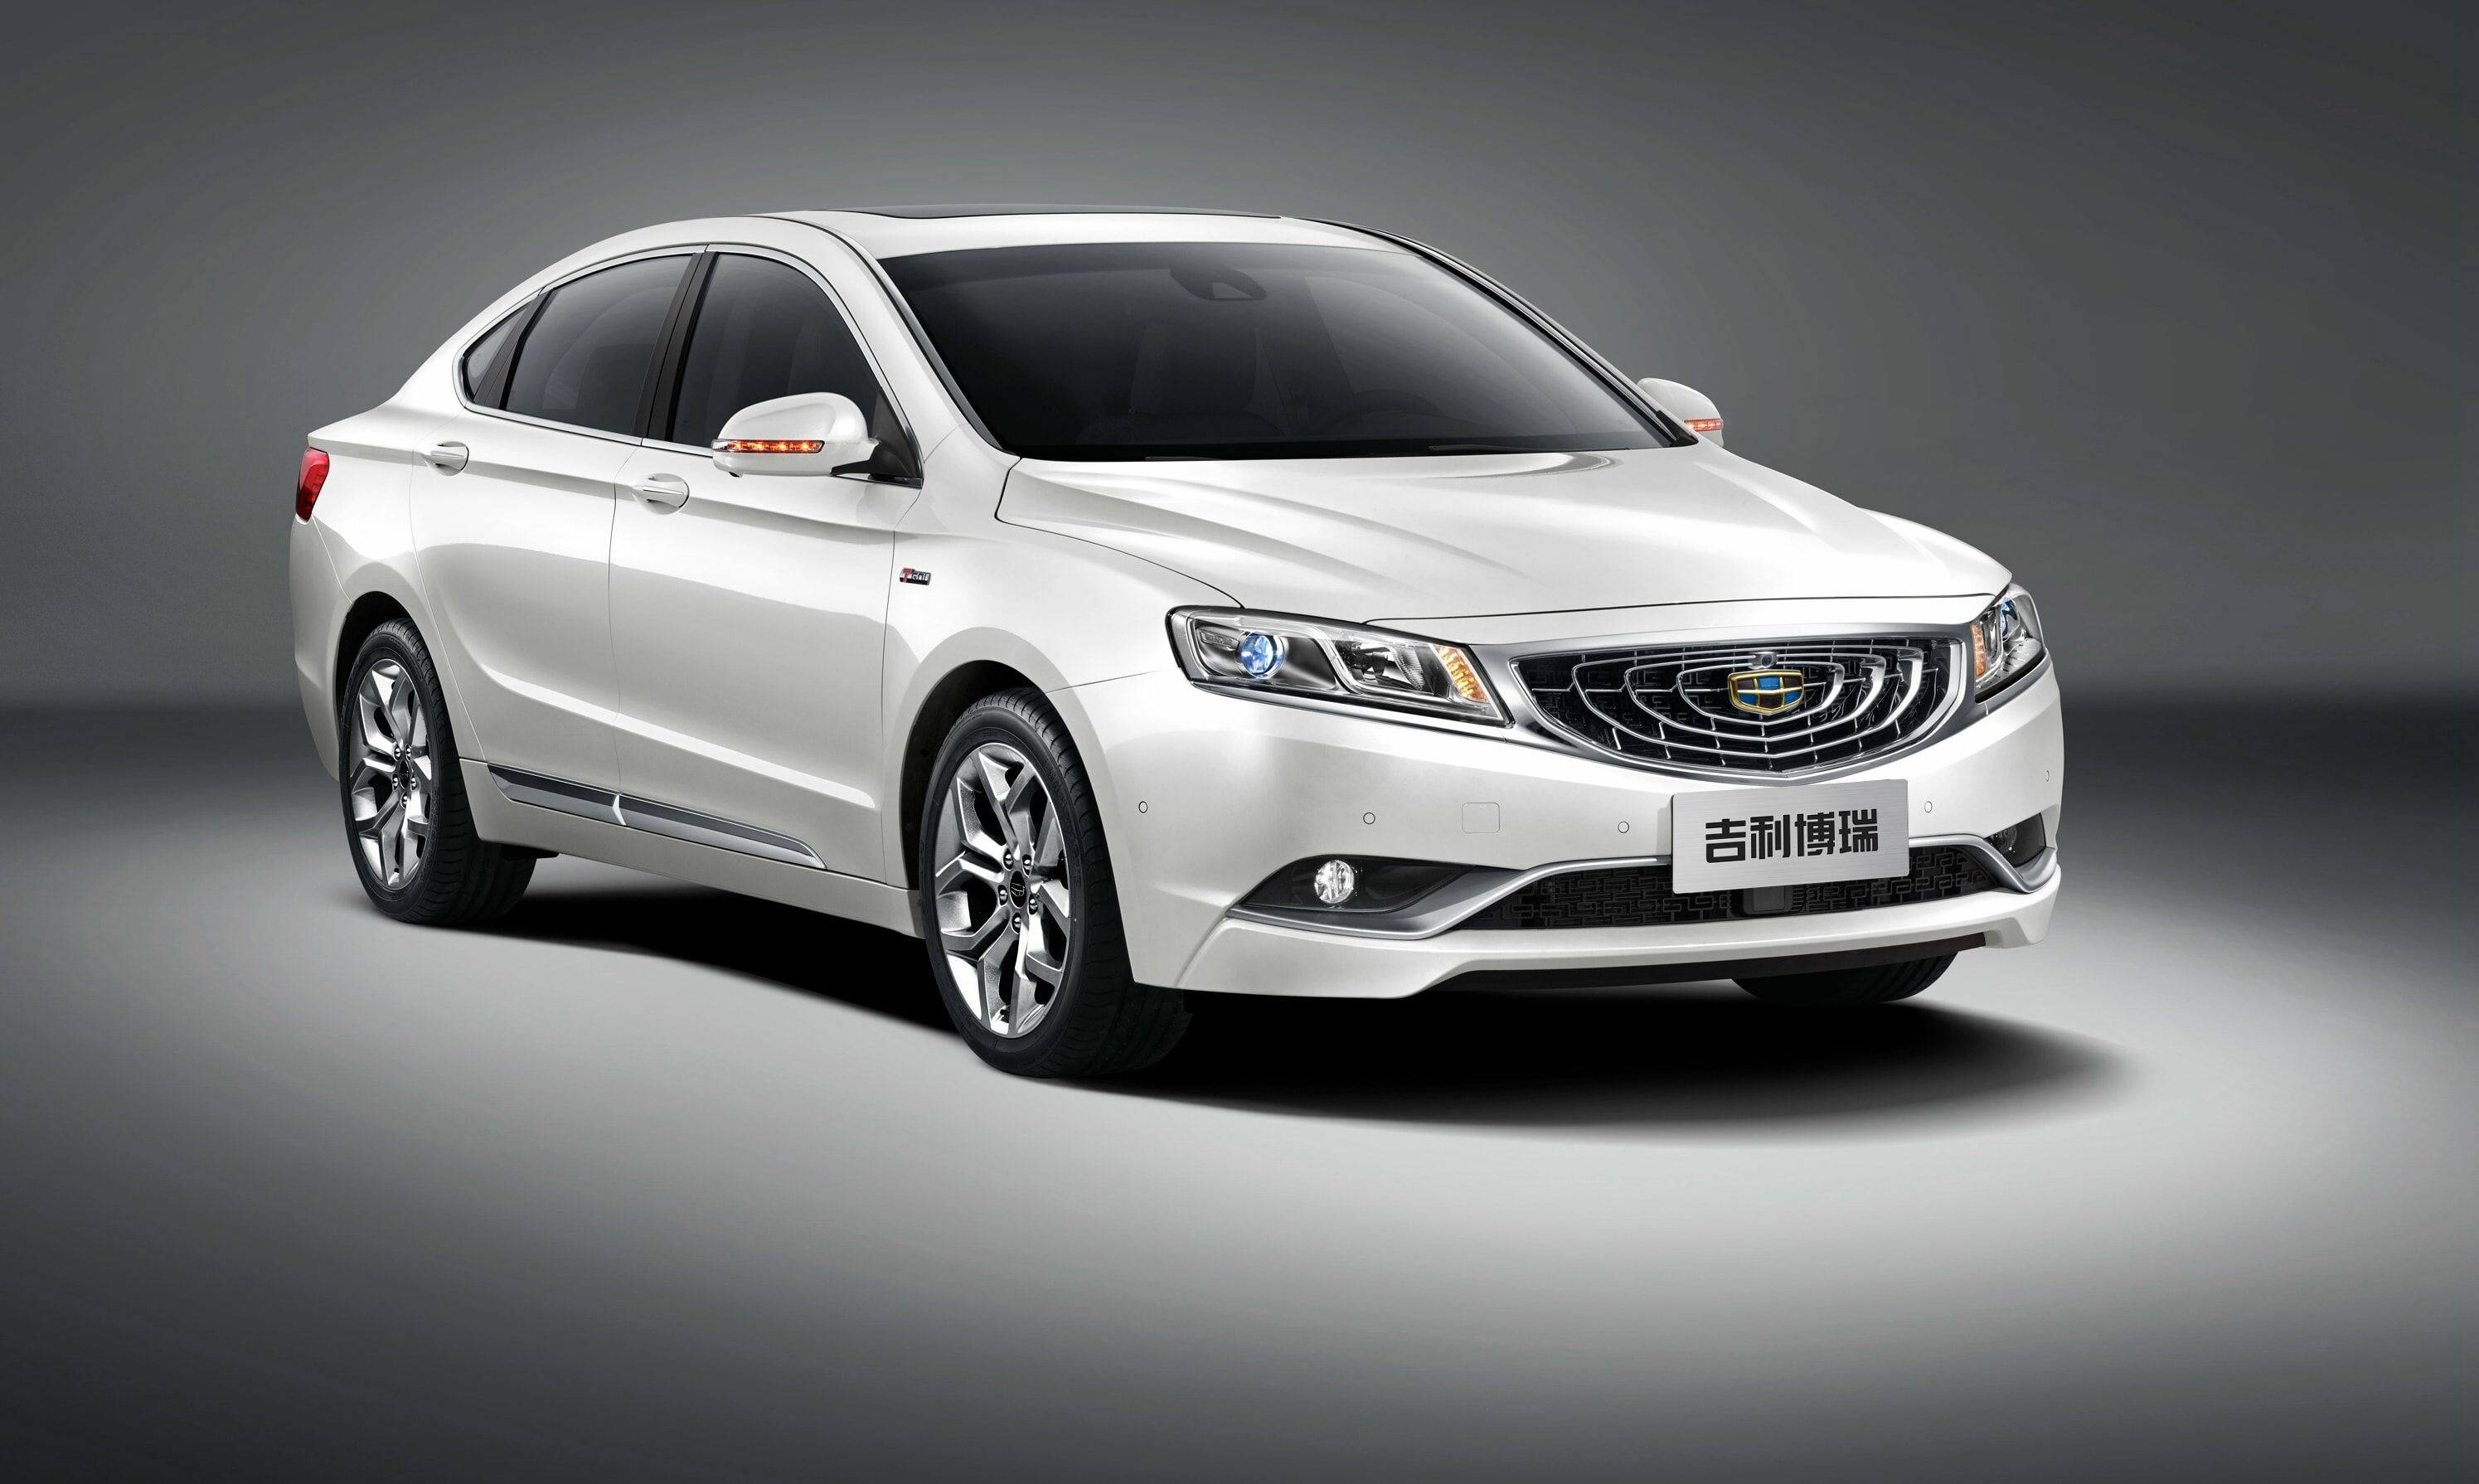 Geely: The company is privately held by Chinese billionaire business magnate Li Shufu. 2990x1790 HD Background.